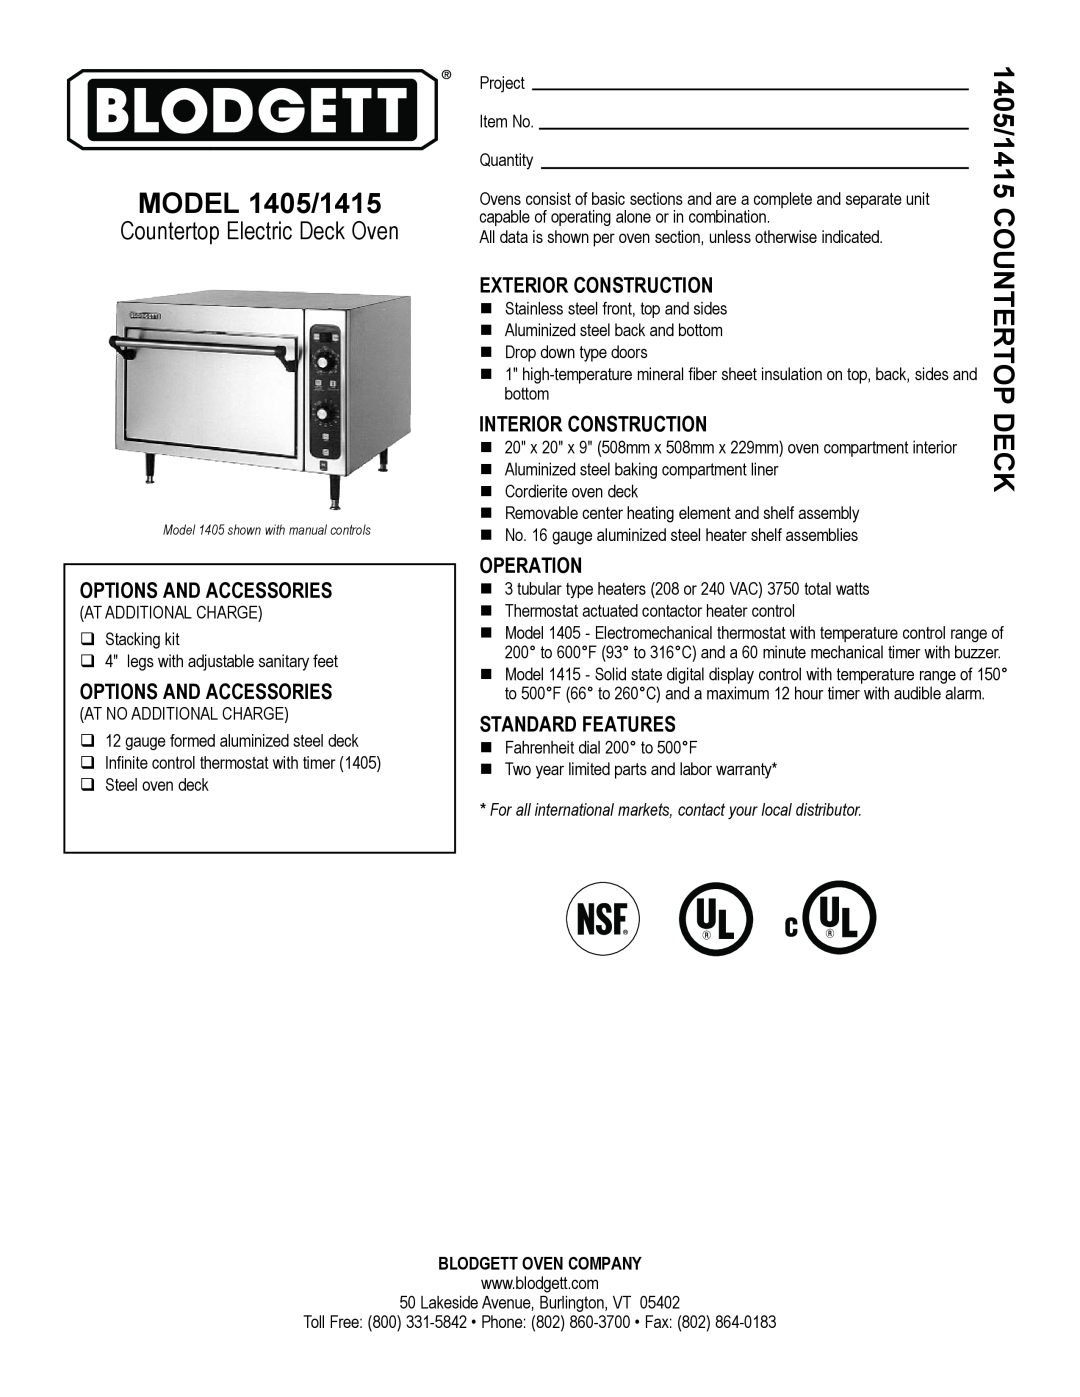 Blodgett warranty MODEL 1405/1415, Options And Accessories, Exterior Construction, Interior Construction, Operation 